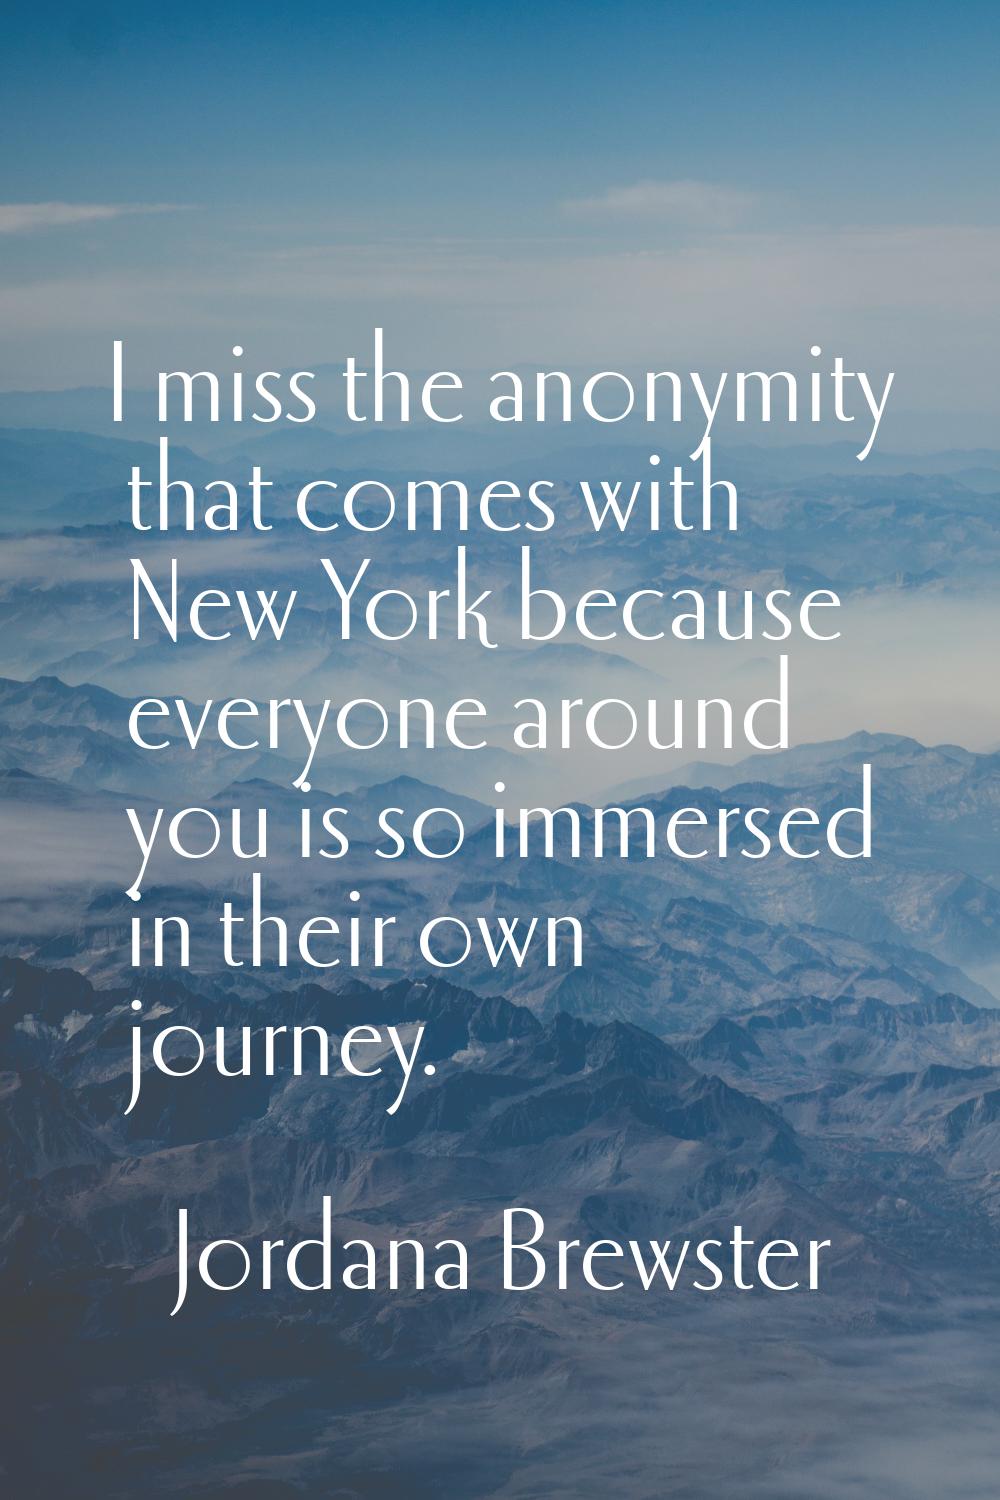 I miss the anonymity that comes with New York because everyone around you is so immersed in their o